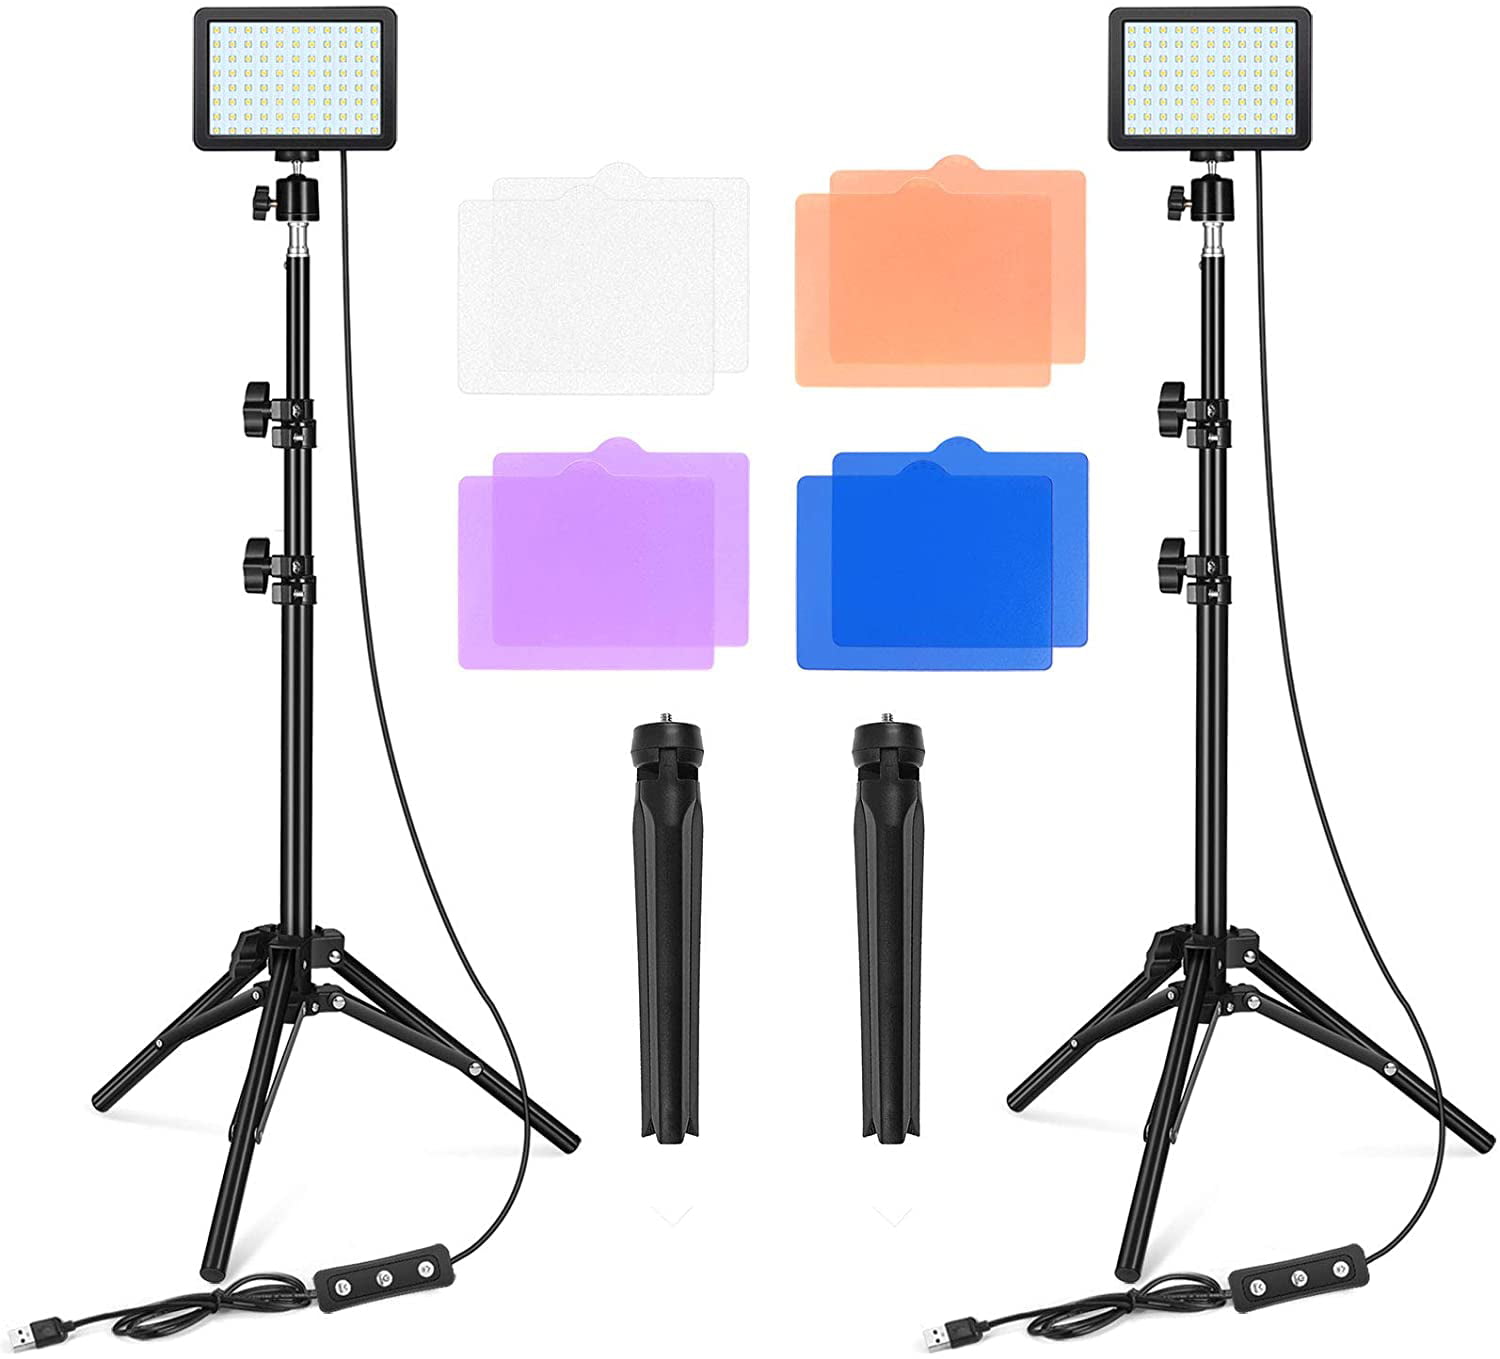 10 Brightness/4 Color Filters Dimmable YouTube LED Video Light Photography Lighting Kit Studio Panel Key Lights for Video Recording Stream USB Fill Light for Camera Photo Adjustable Tripod Stand 